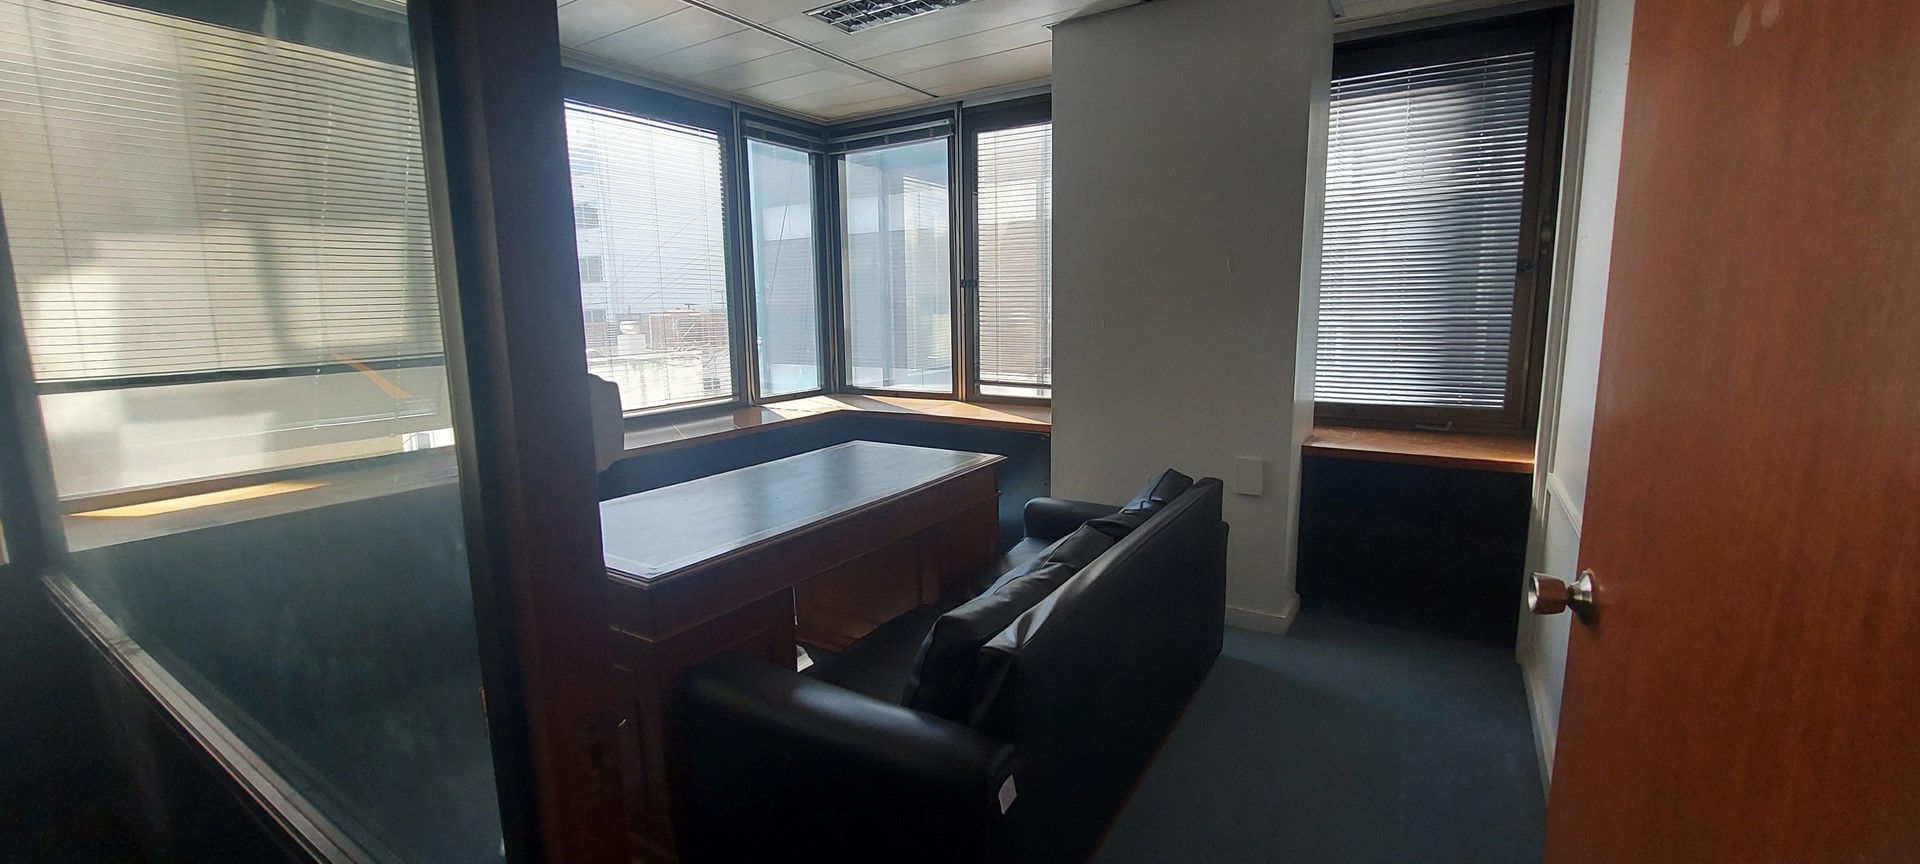 #3319476 | Rental | Office | Microcentro (REM Real Estate Managers)